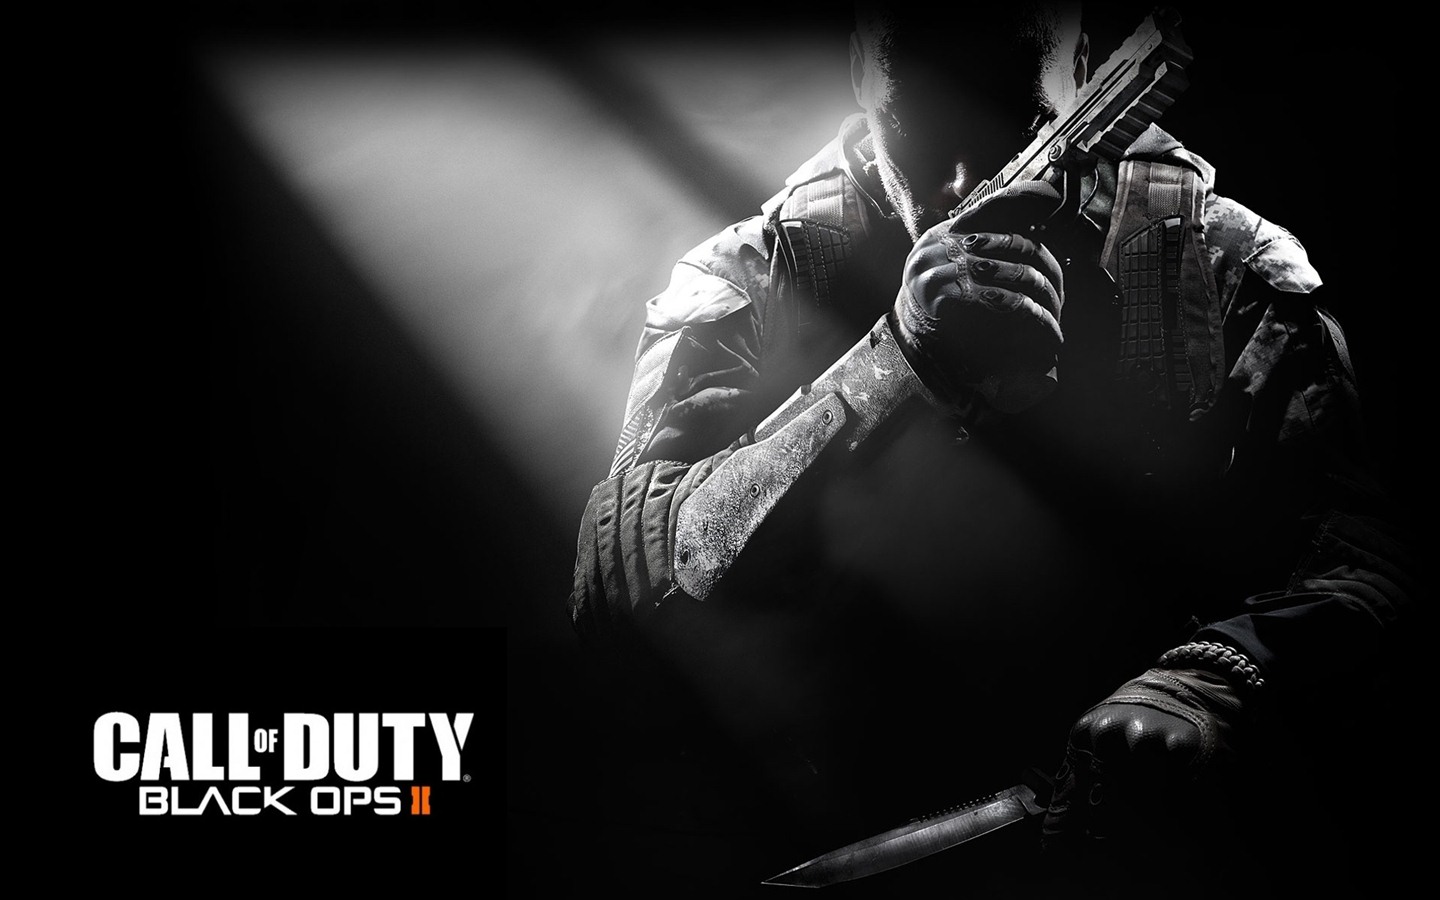 Call of Duty: Black Ops 2 HD wallpapers #11 - 1440x900